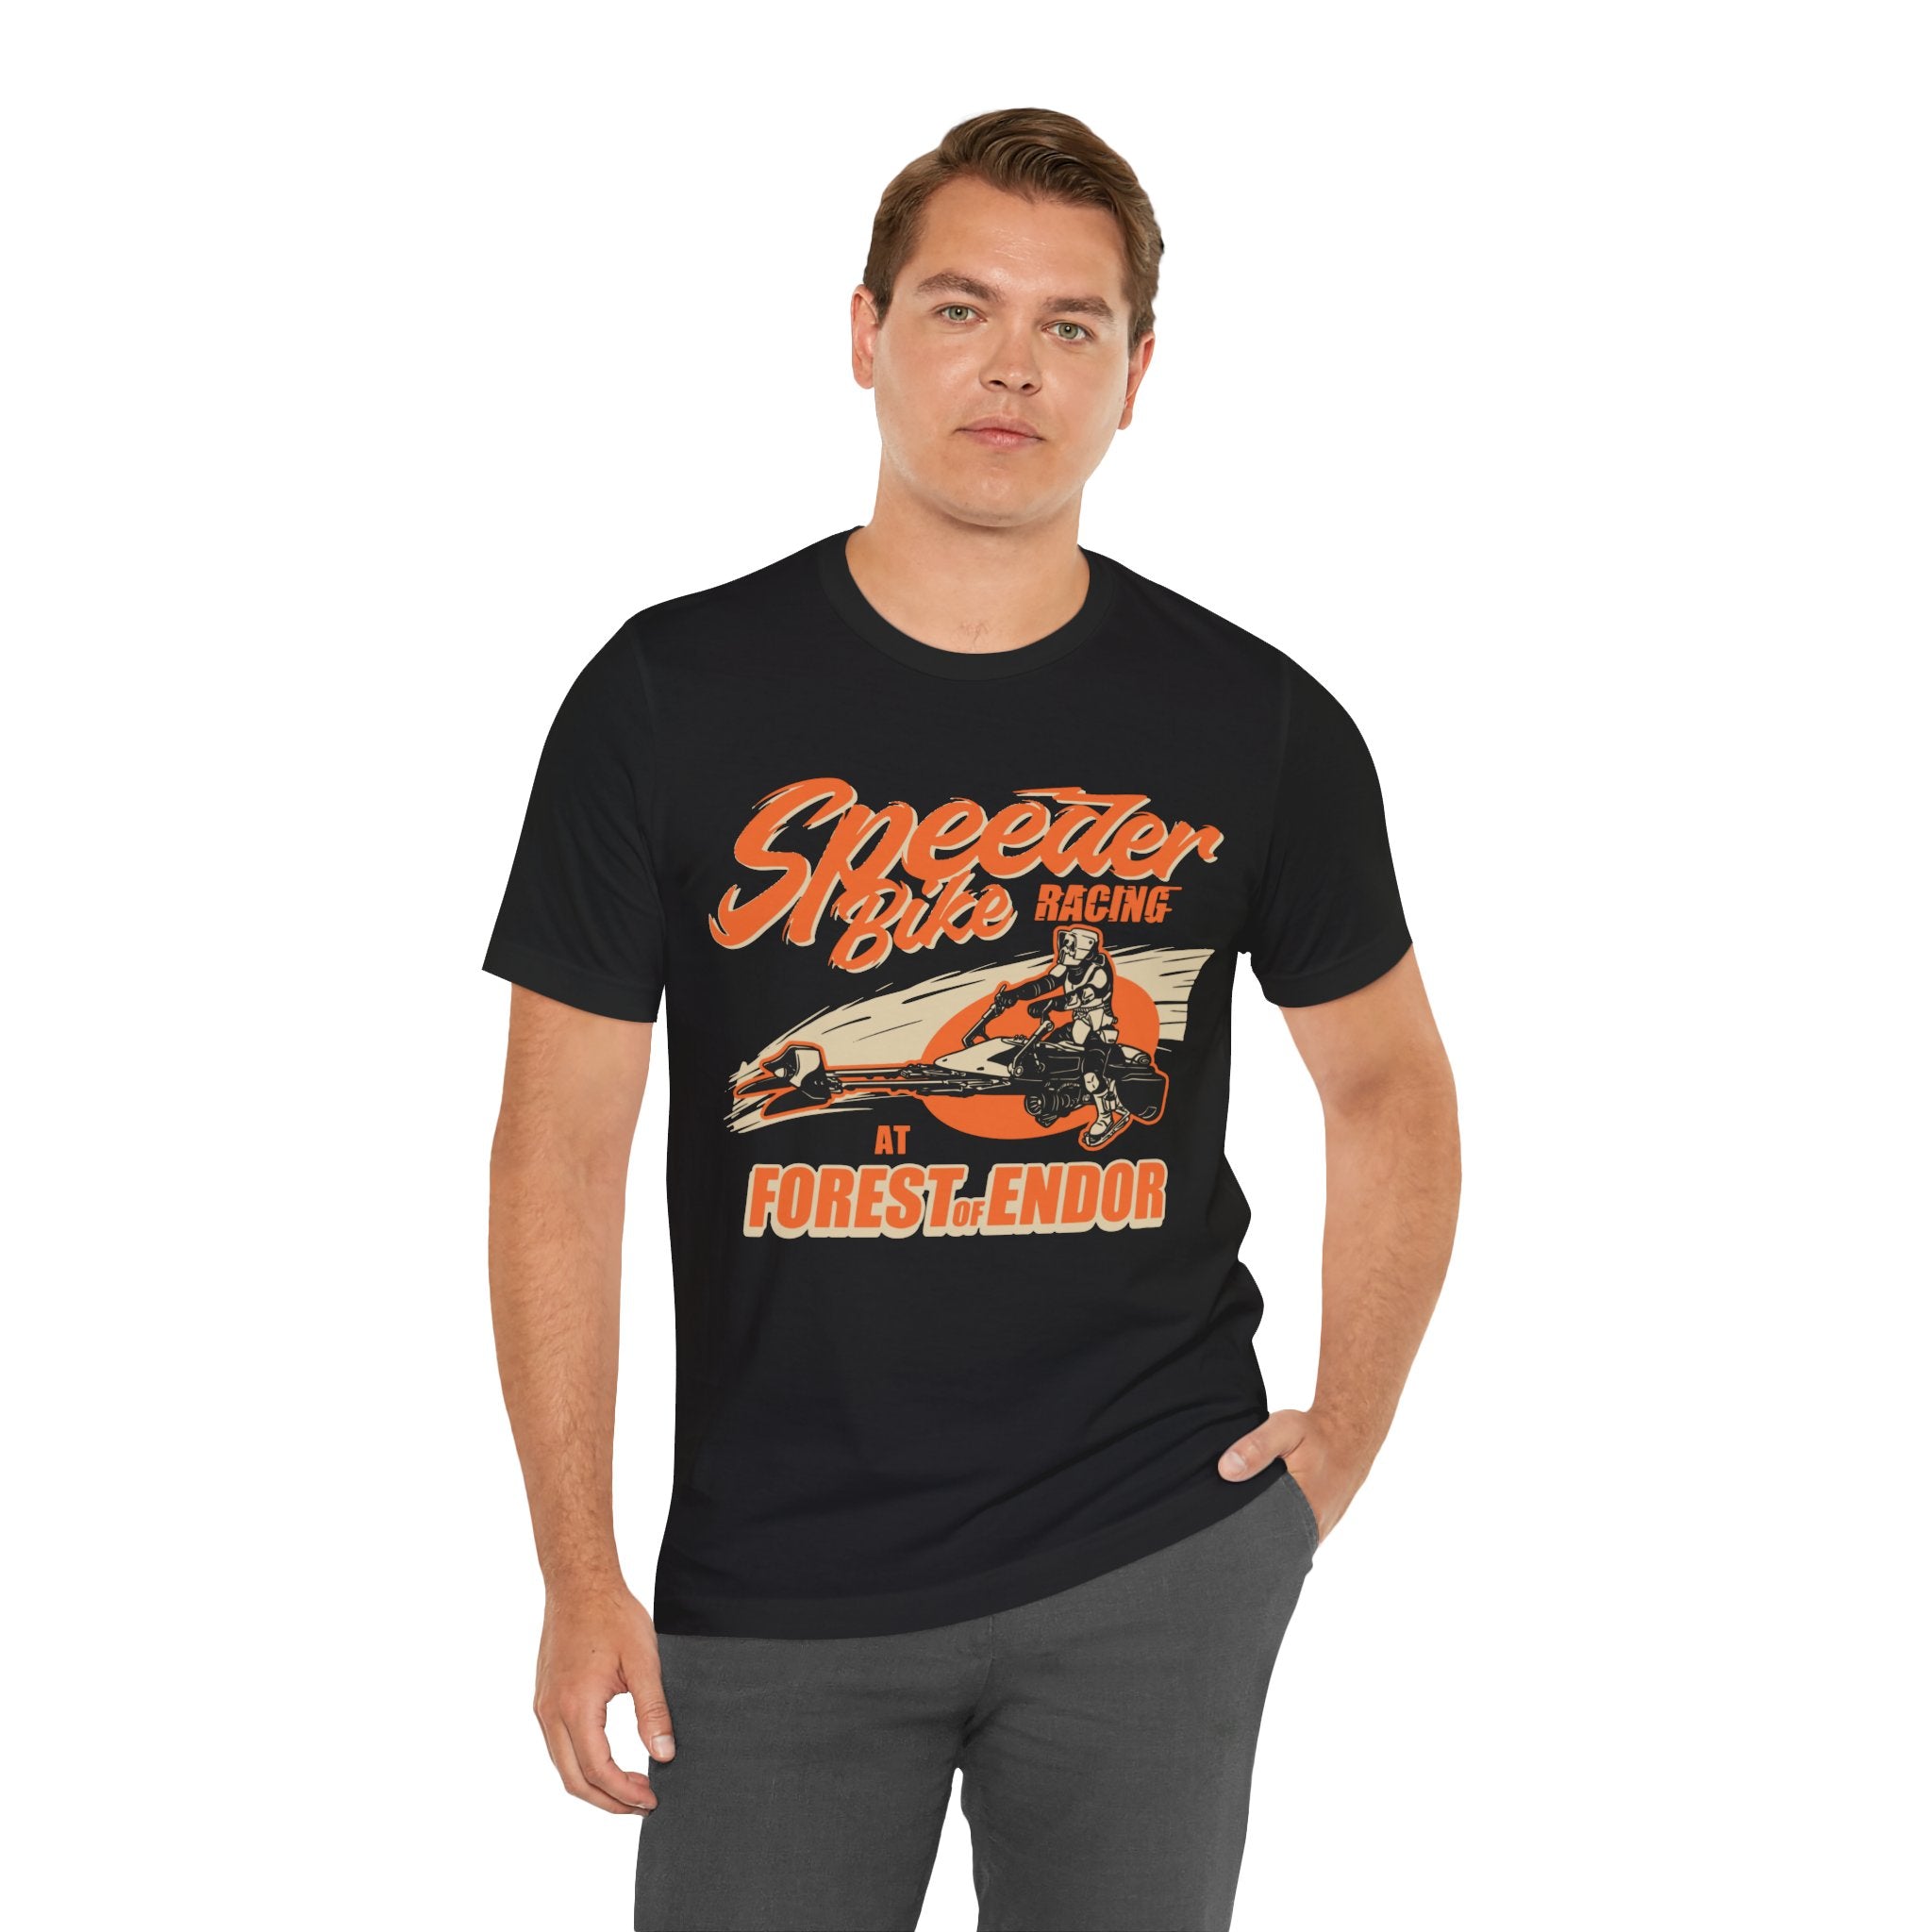 A man wearing a black jersey tee with orange "Speeder Bike Racing" graphic, standing against a white background.